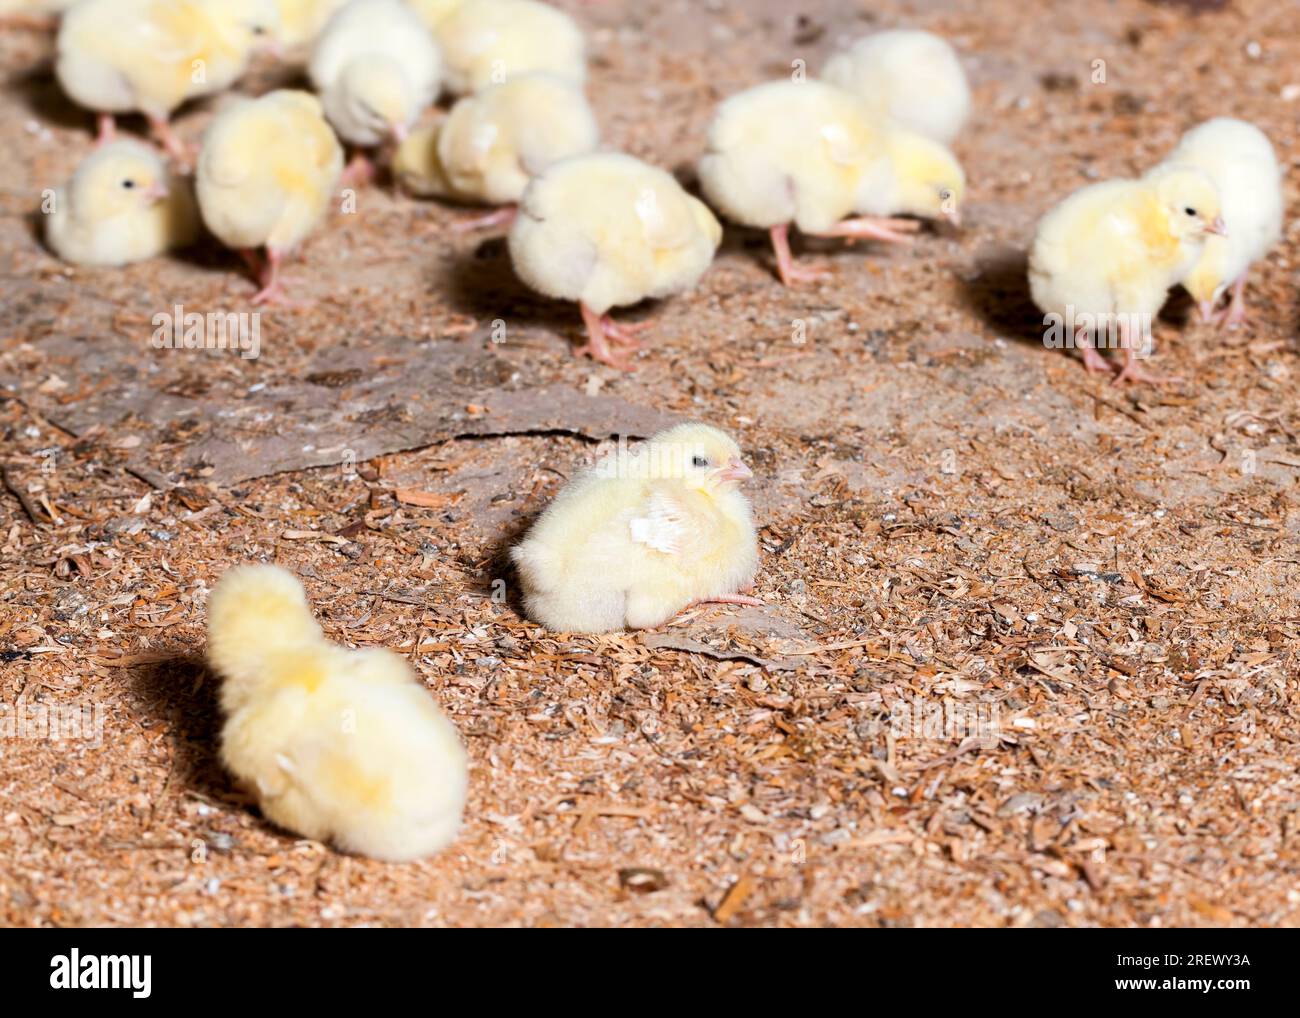 genetically enhanced white chicken chicks at a poultry farm where broiler chicken is raised for meat, many young meat chicken chicks, closeup Stock Photo